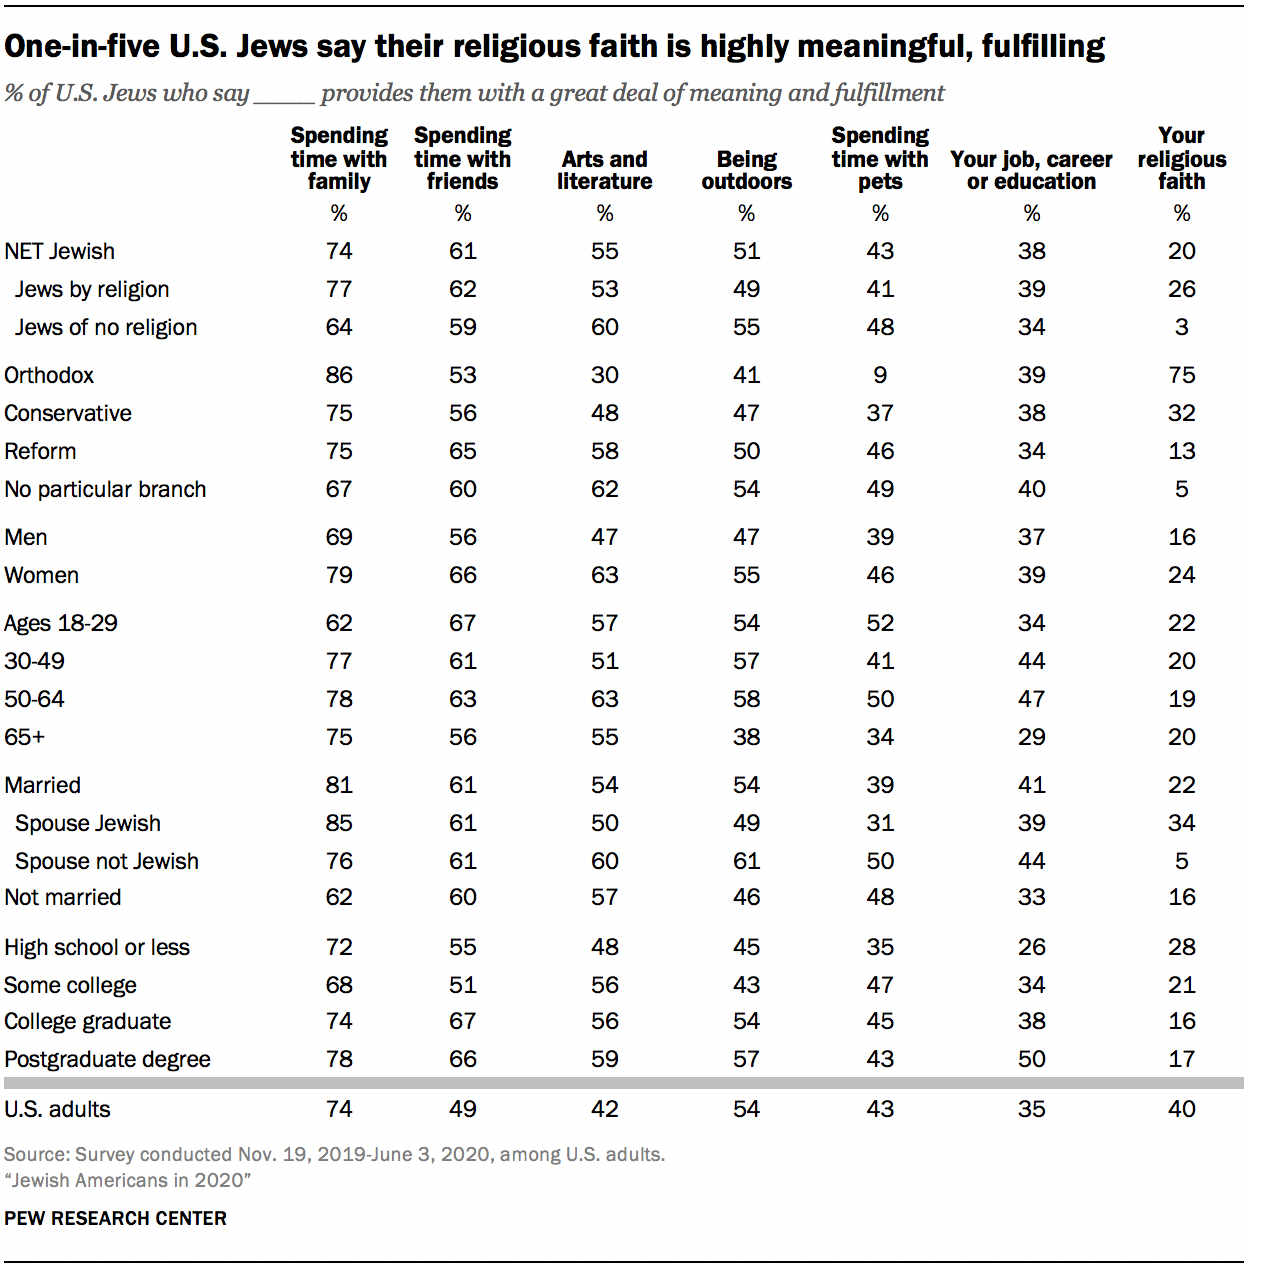 One-in-five U.S. Jews say their religious faith is highly meaningful, fulfilling